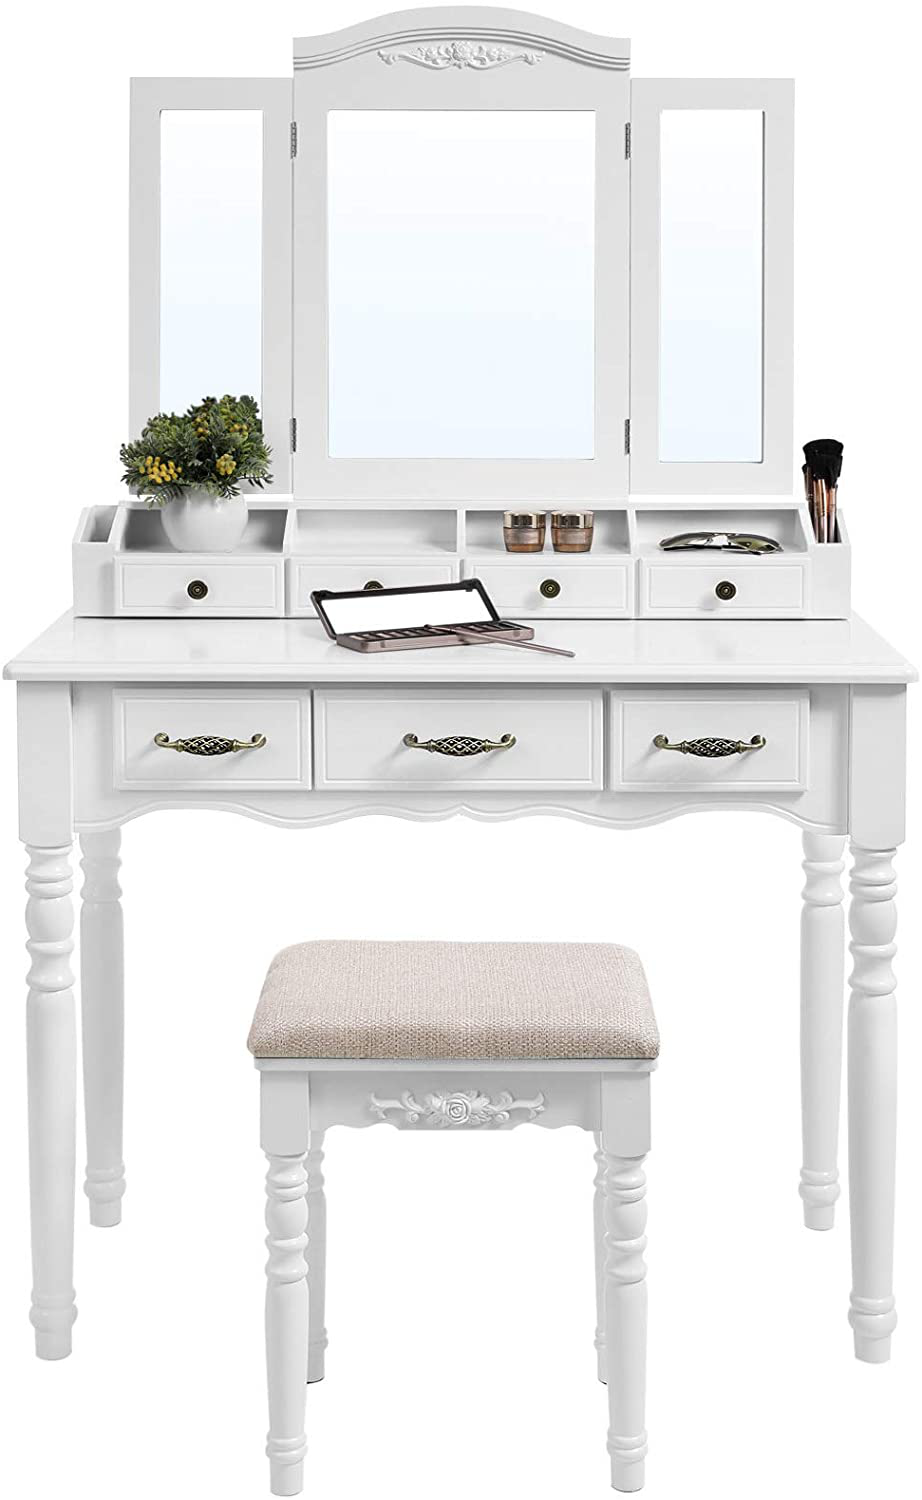 Lynton Dressing table set with 7 Drawers